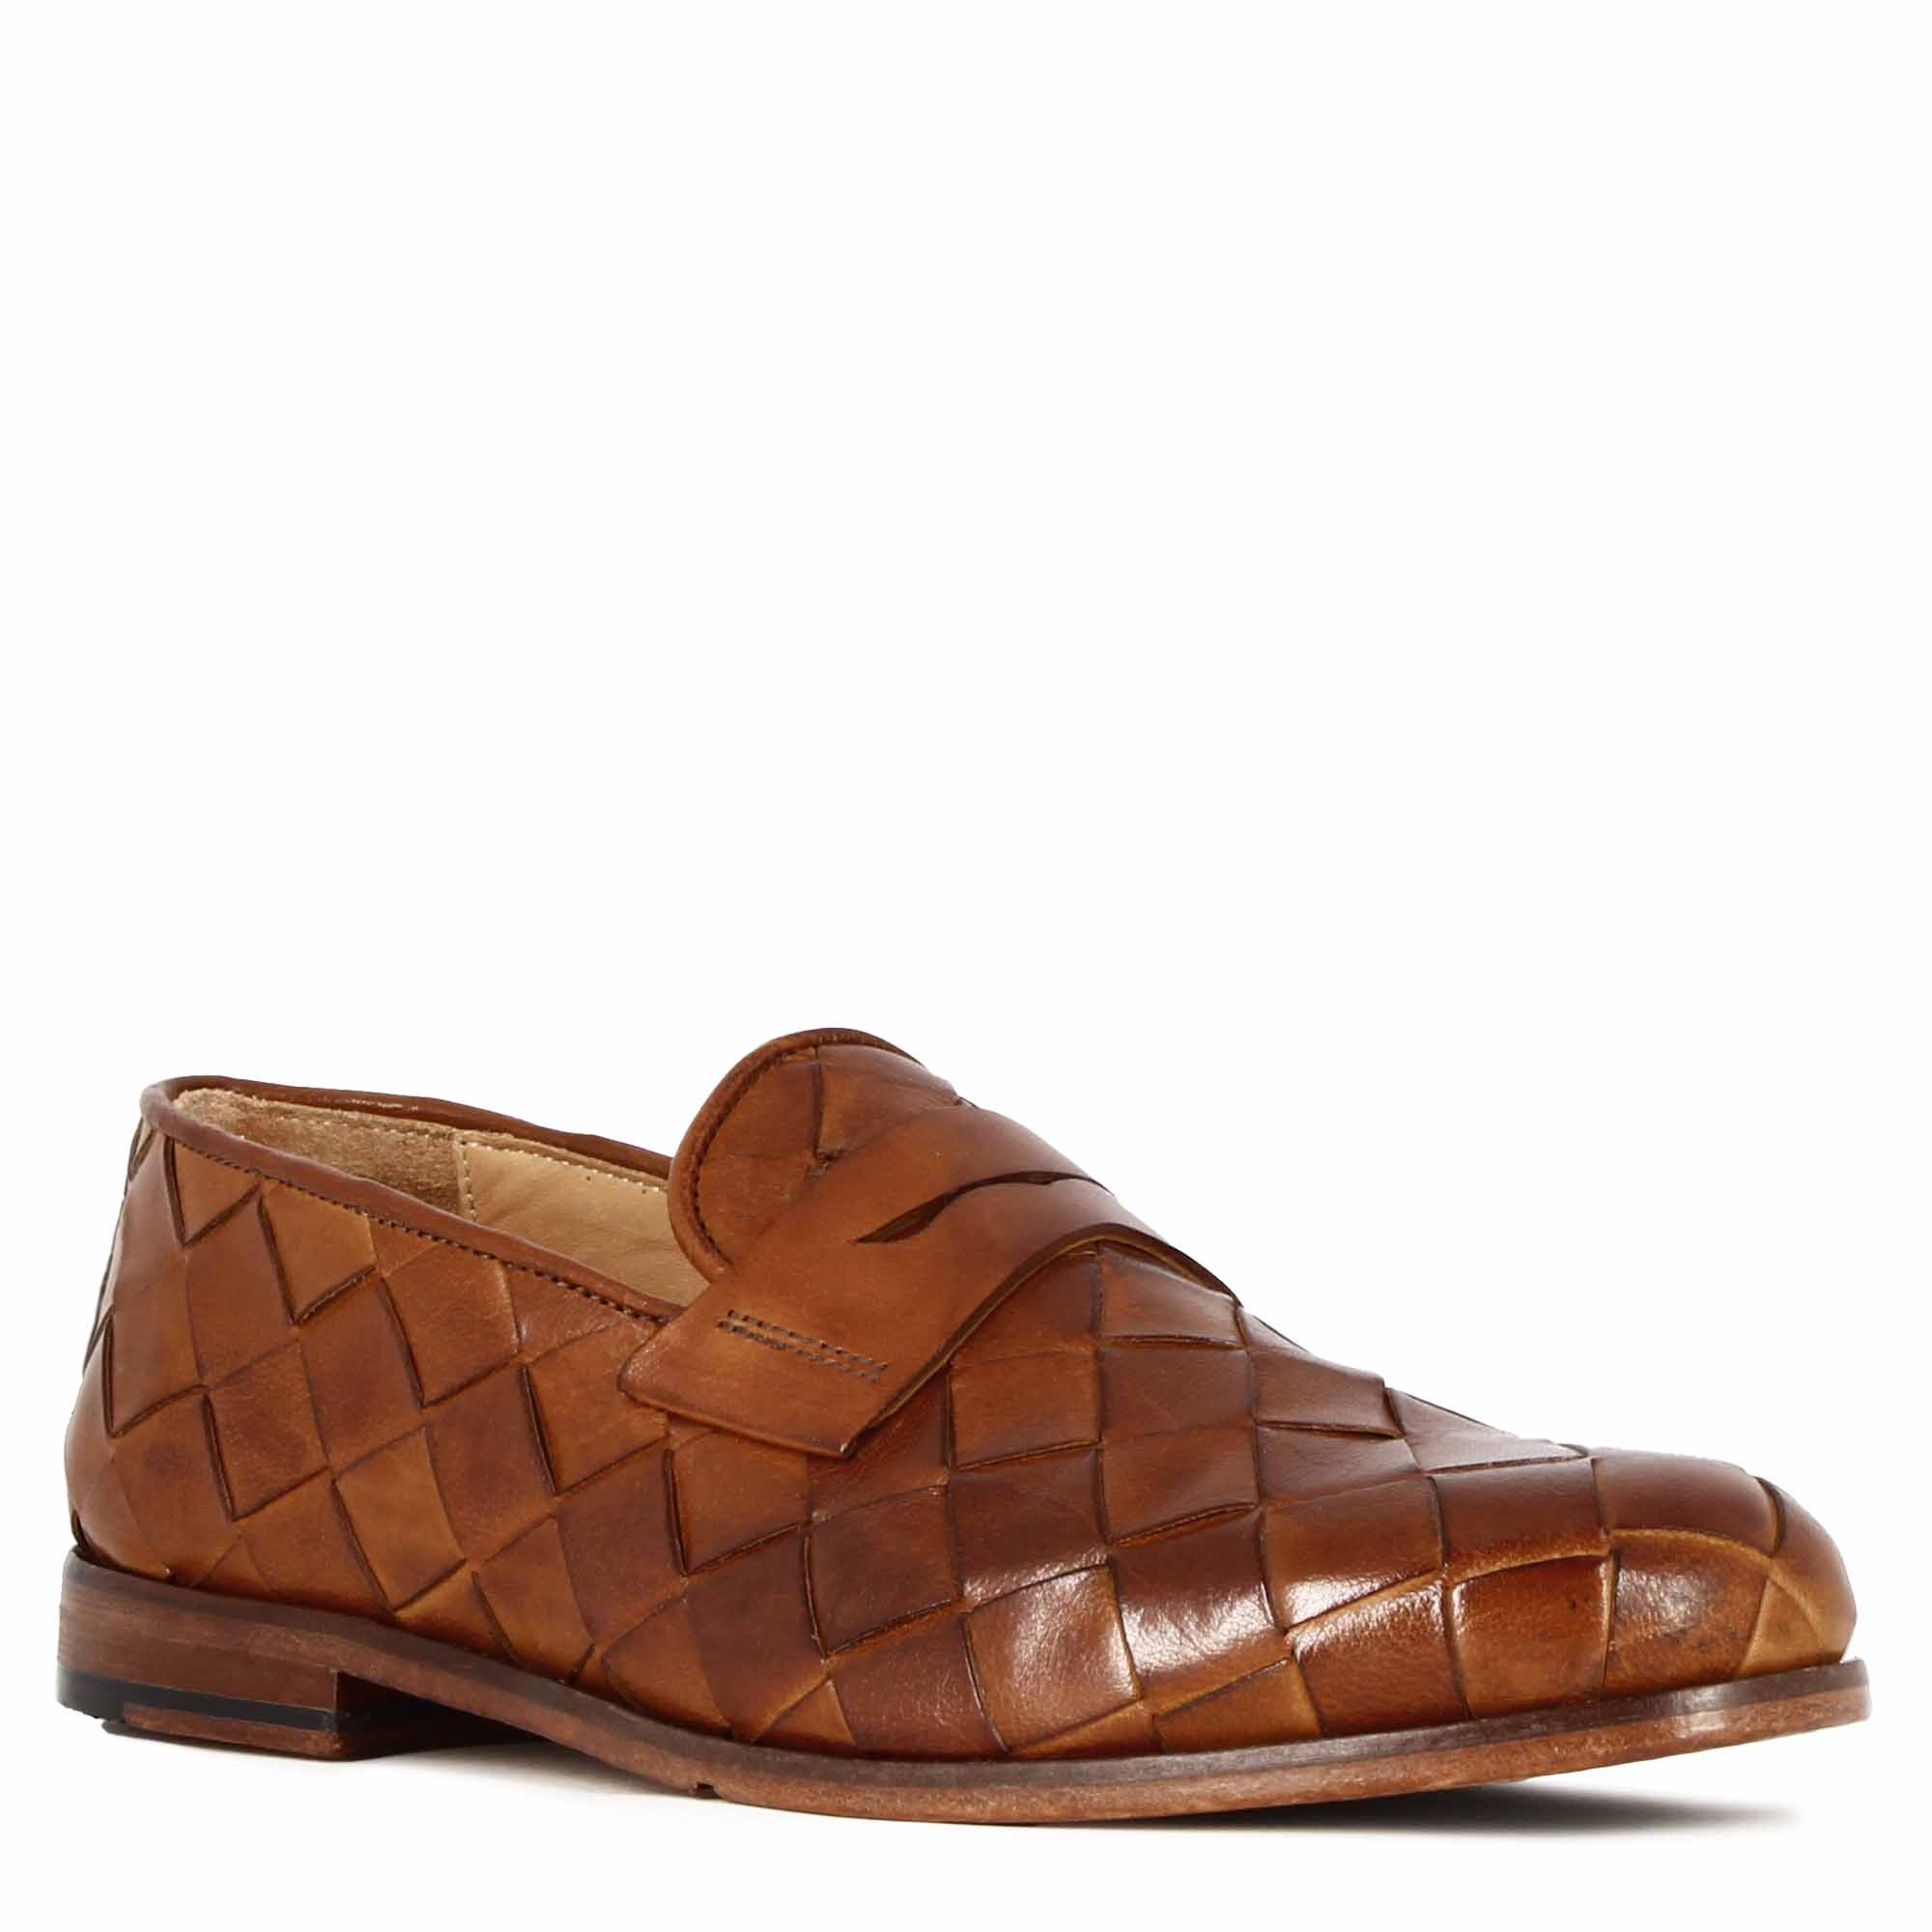 Vintage Brown Loafer in Woven Leather